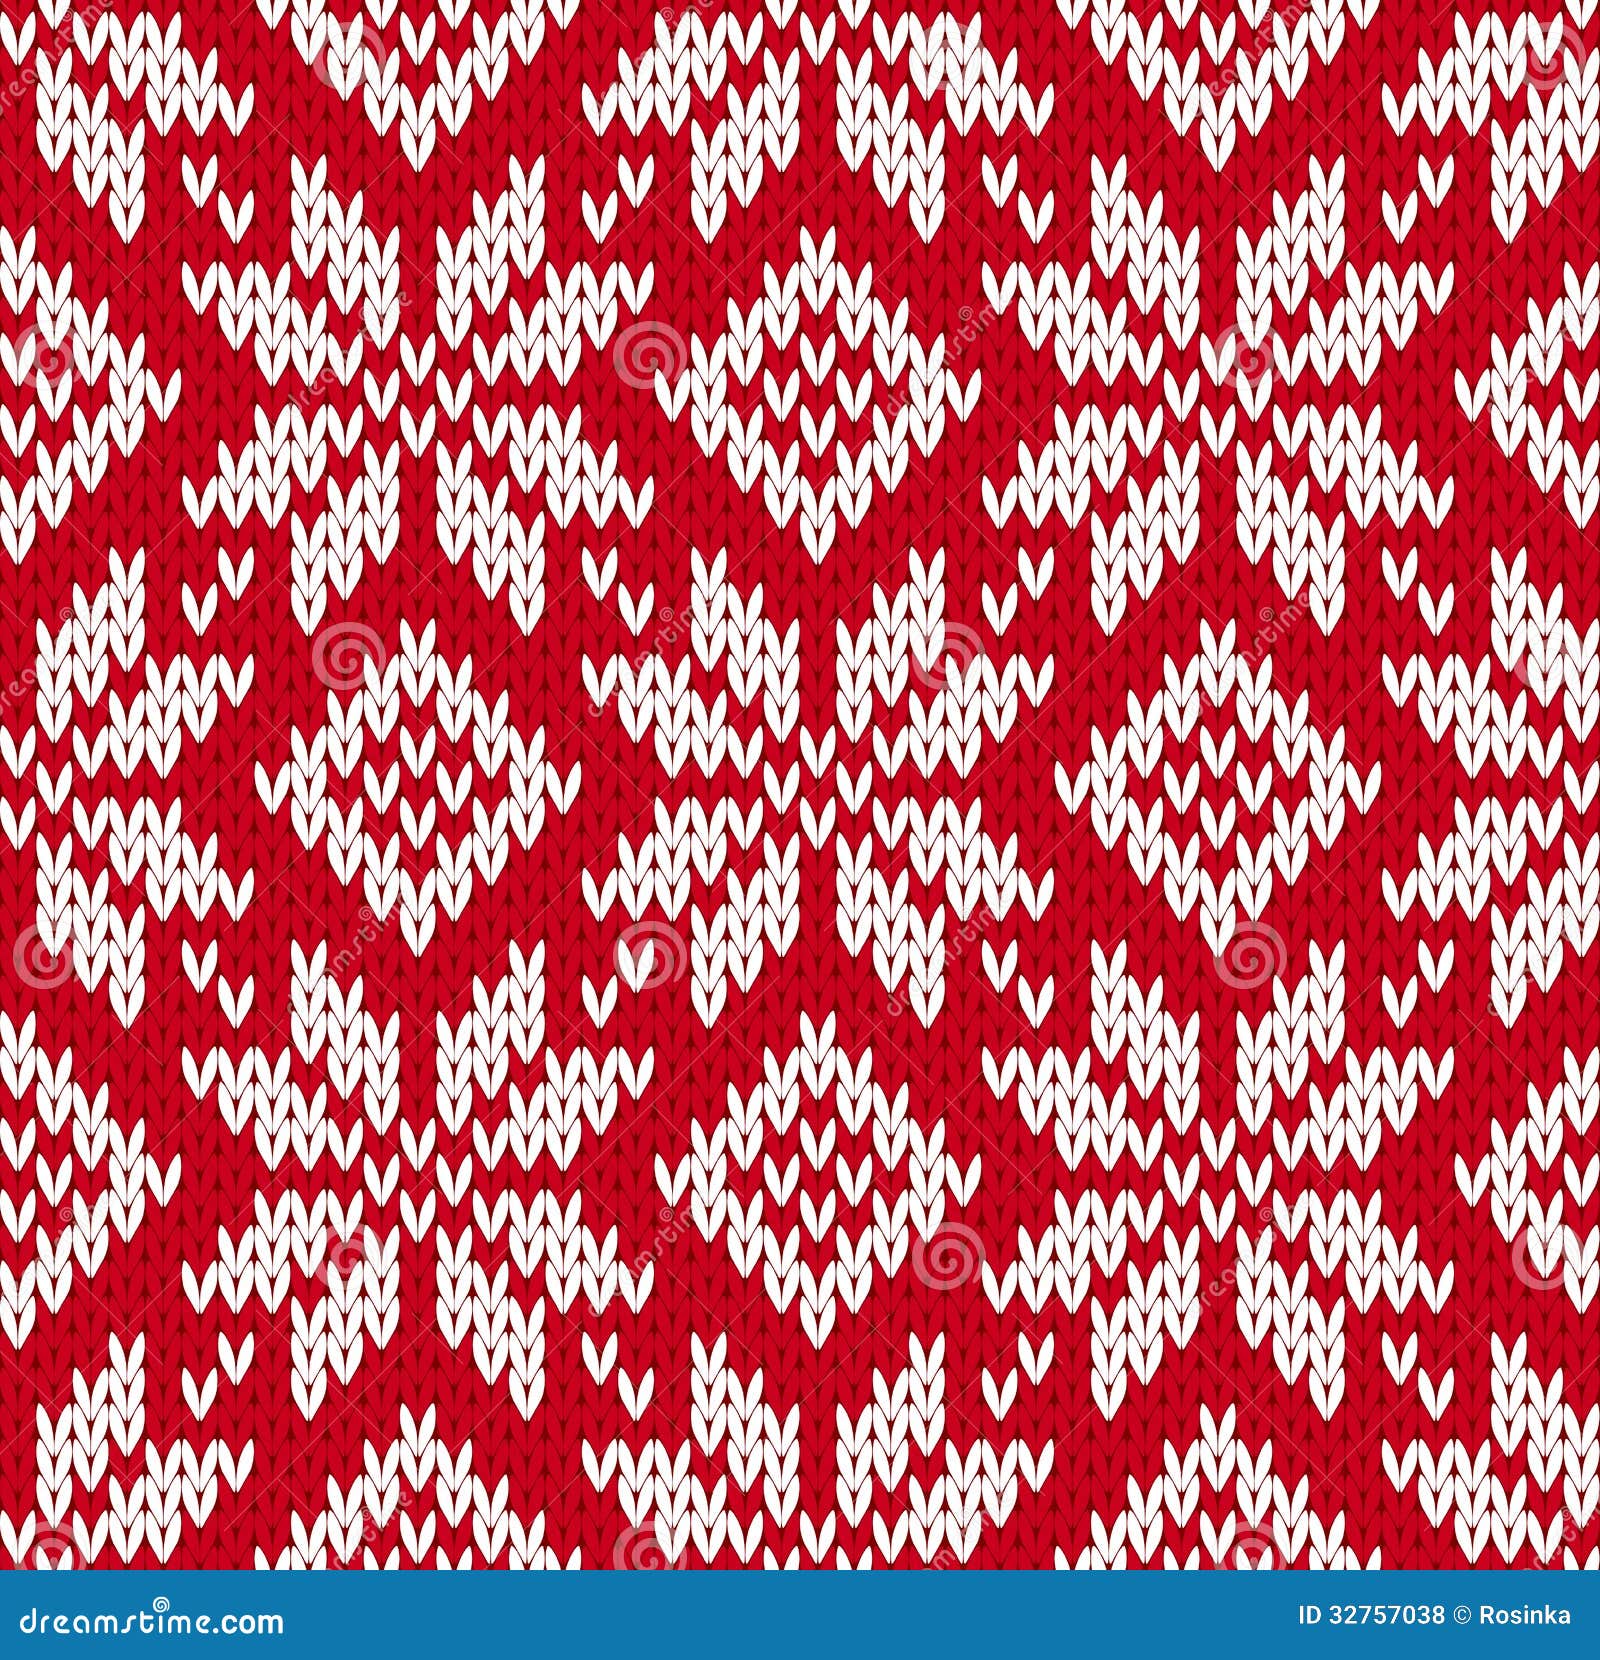 Nordic Knitted Seamless Pattern Royalty Free Stock Photos ...